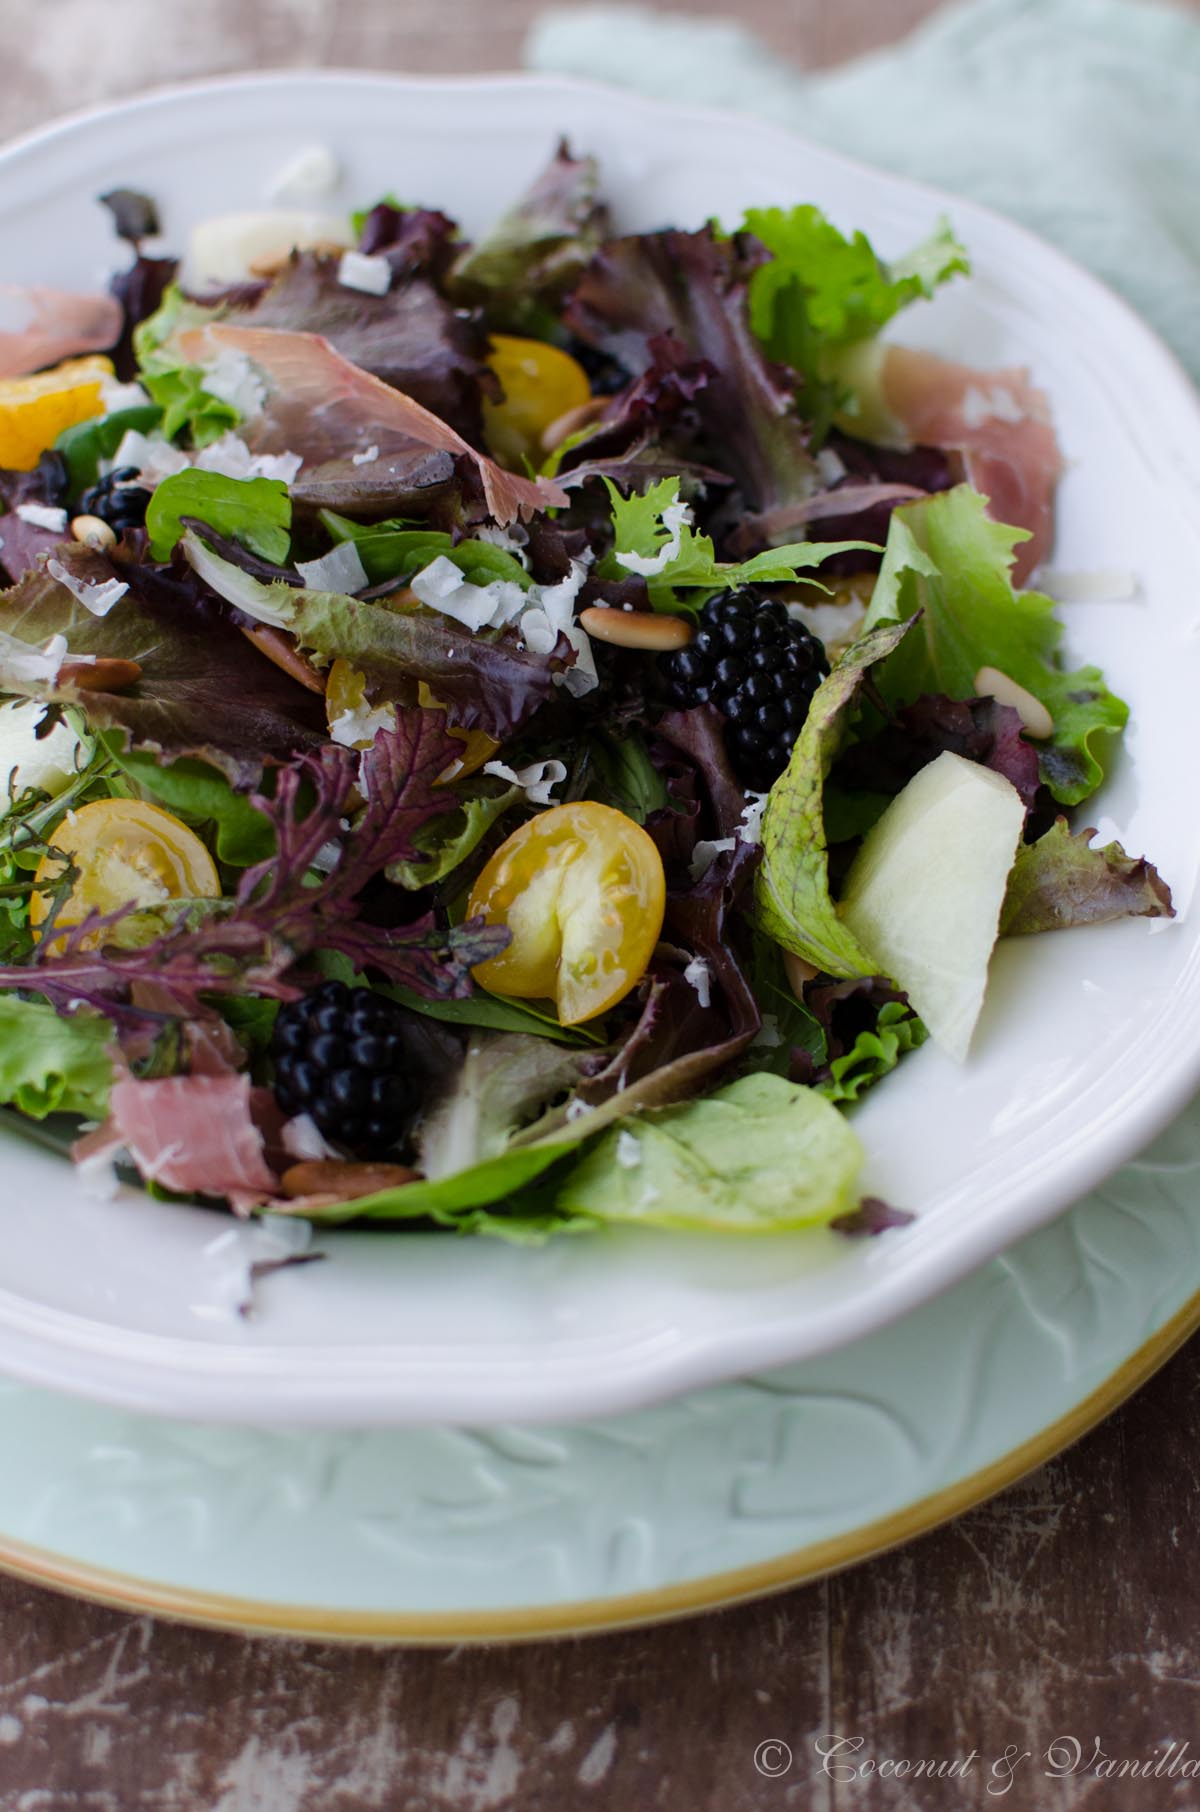 Mesclun salad with blackberries, cantaloupe and prosciutto